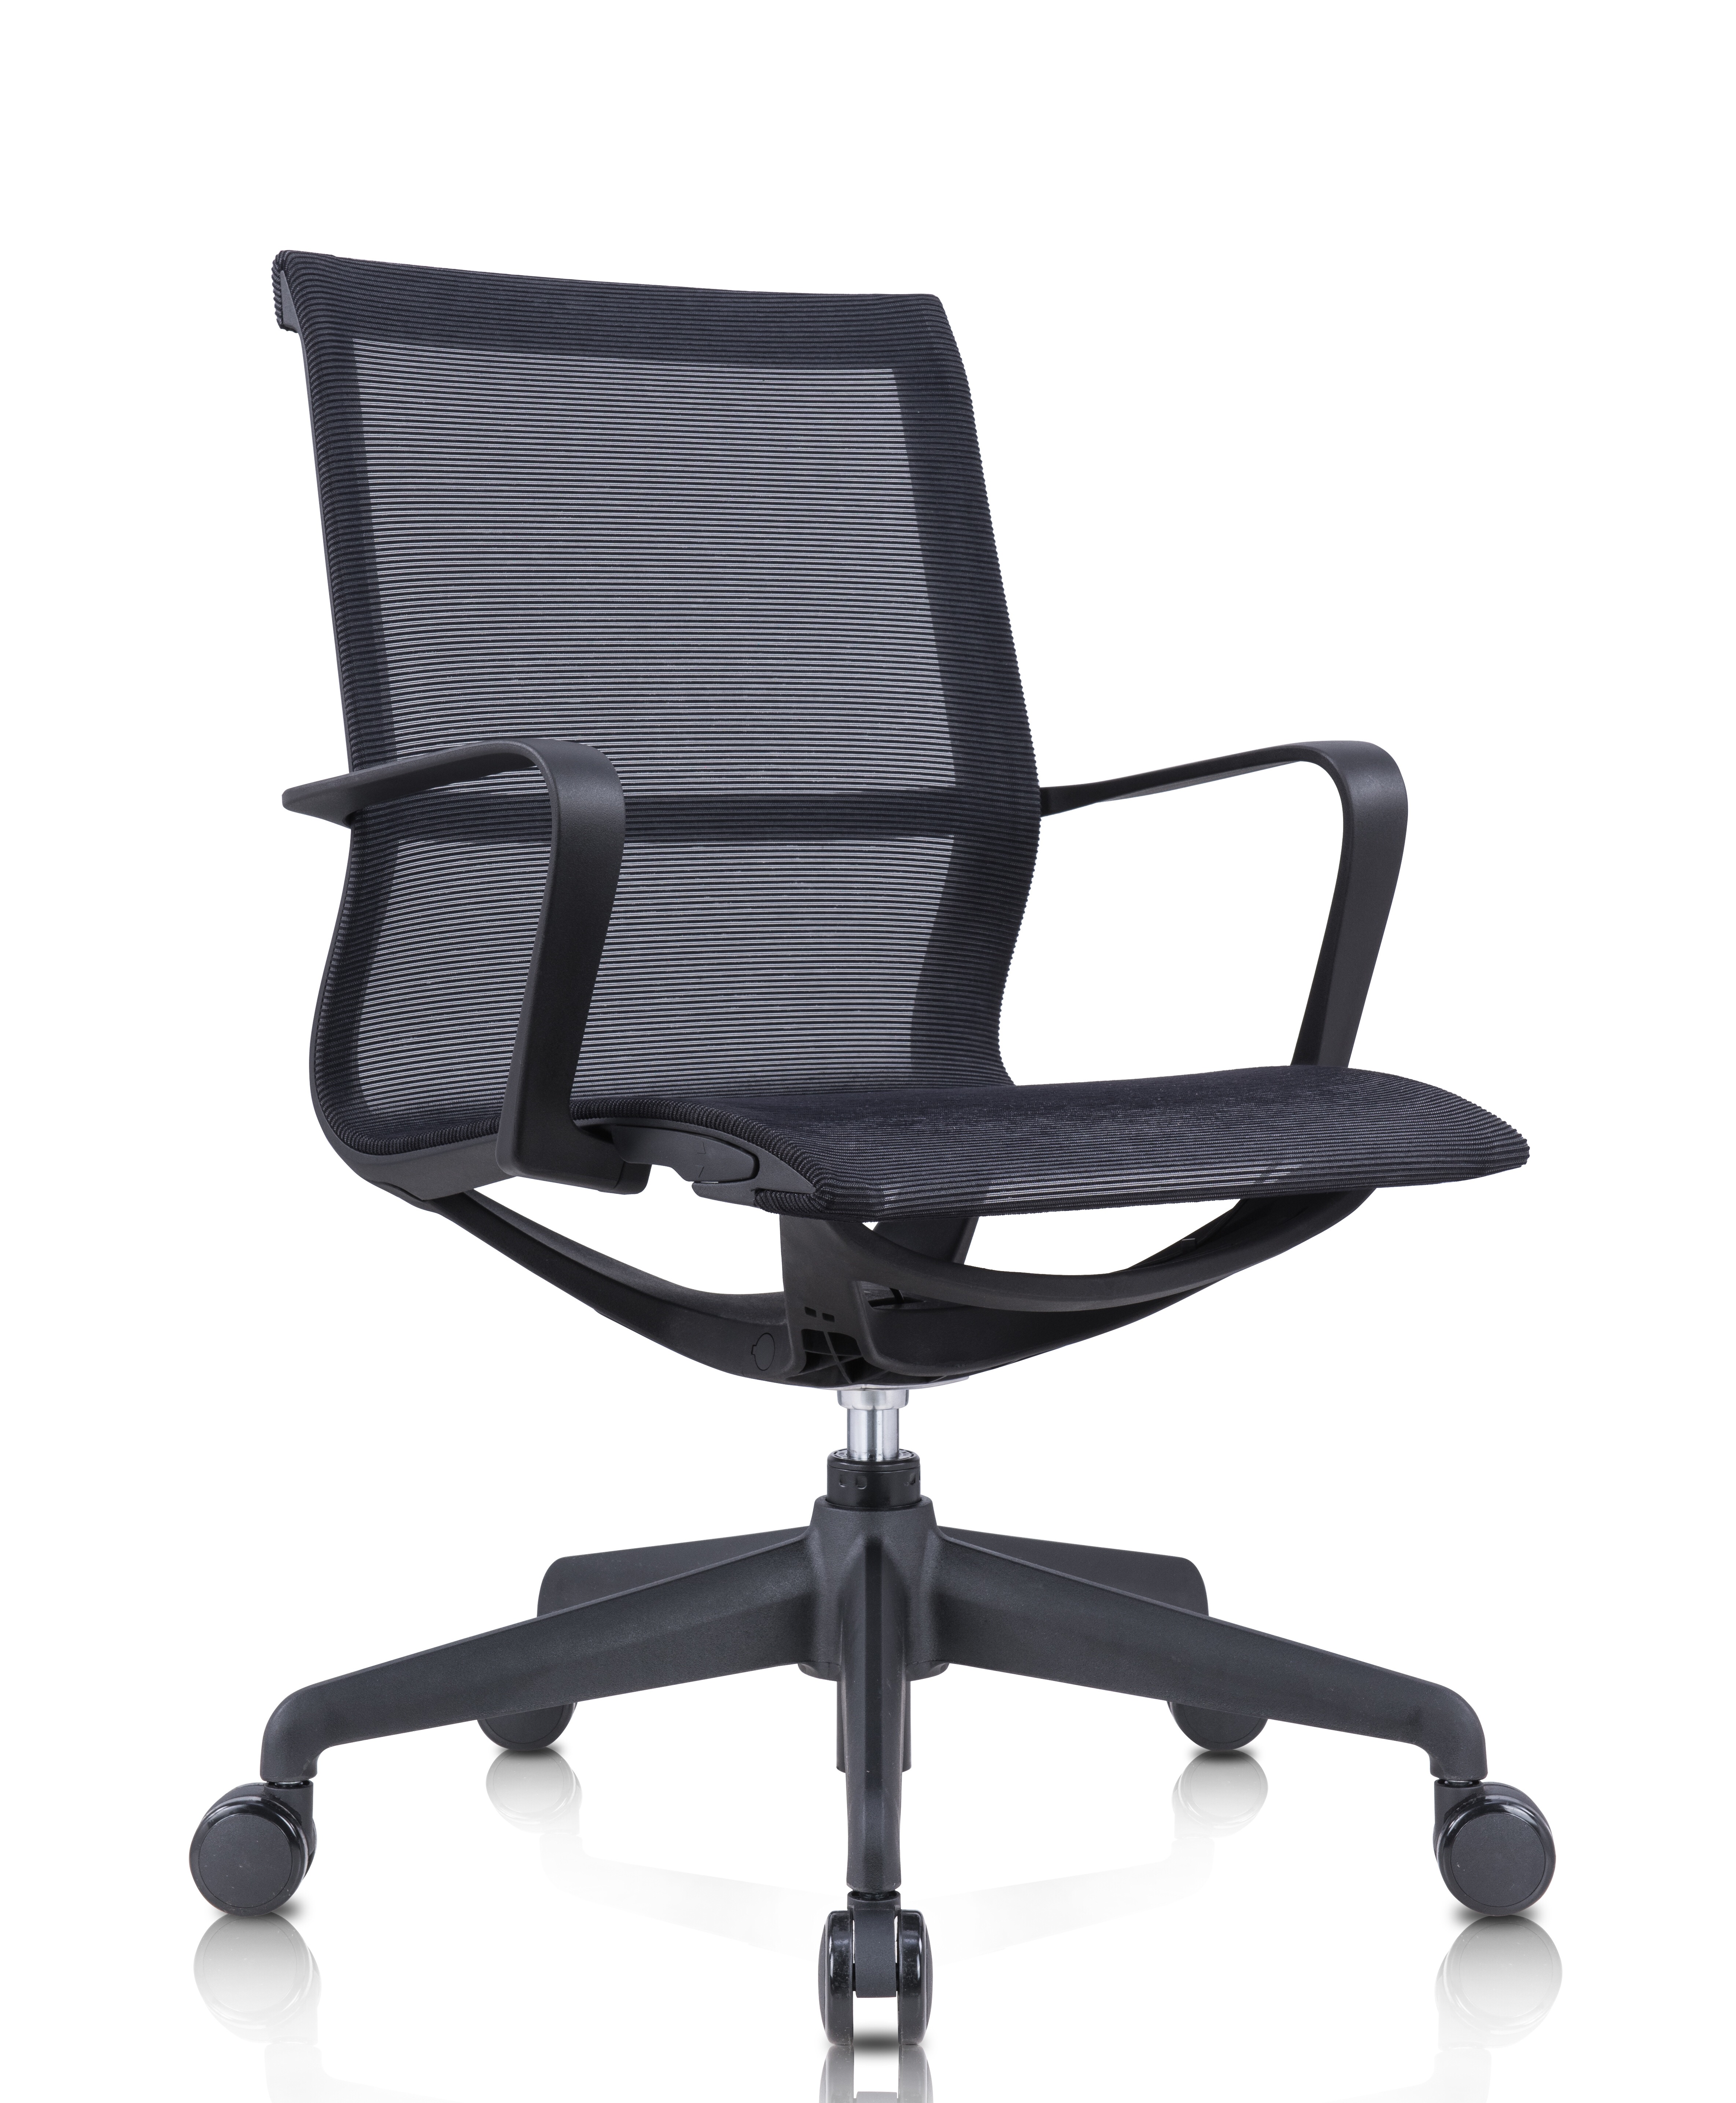 Top Quality Swivel Mesh Office Chair - Office Furniture Full Mesh Popular Staff Chair CH-285B – SitZone